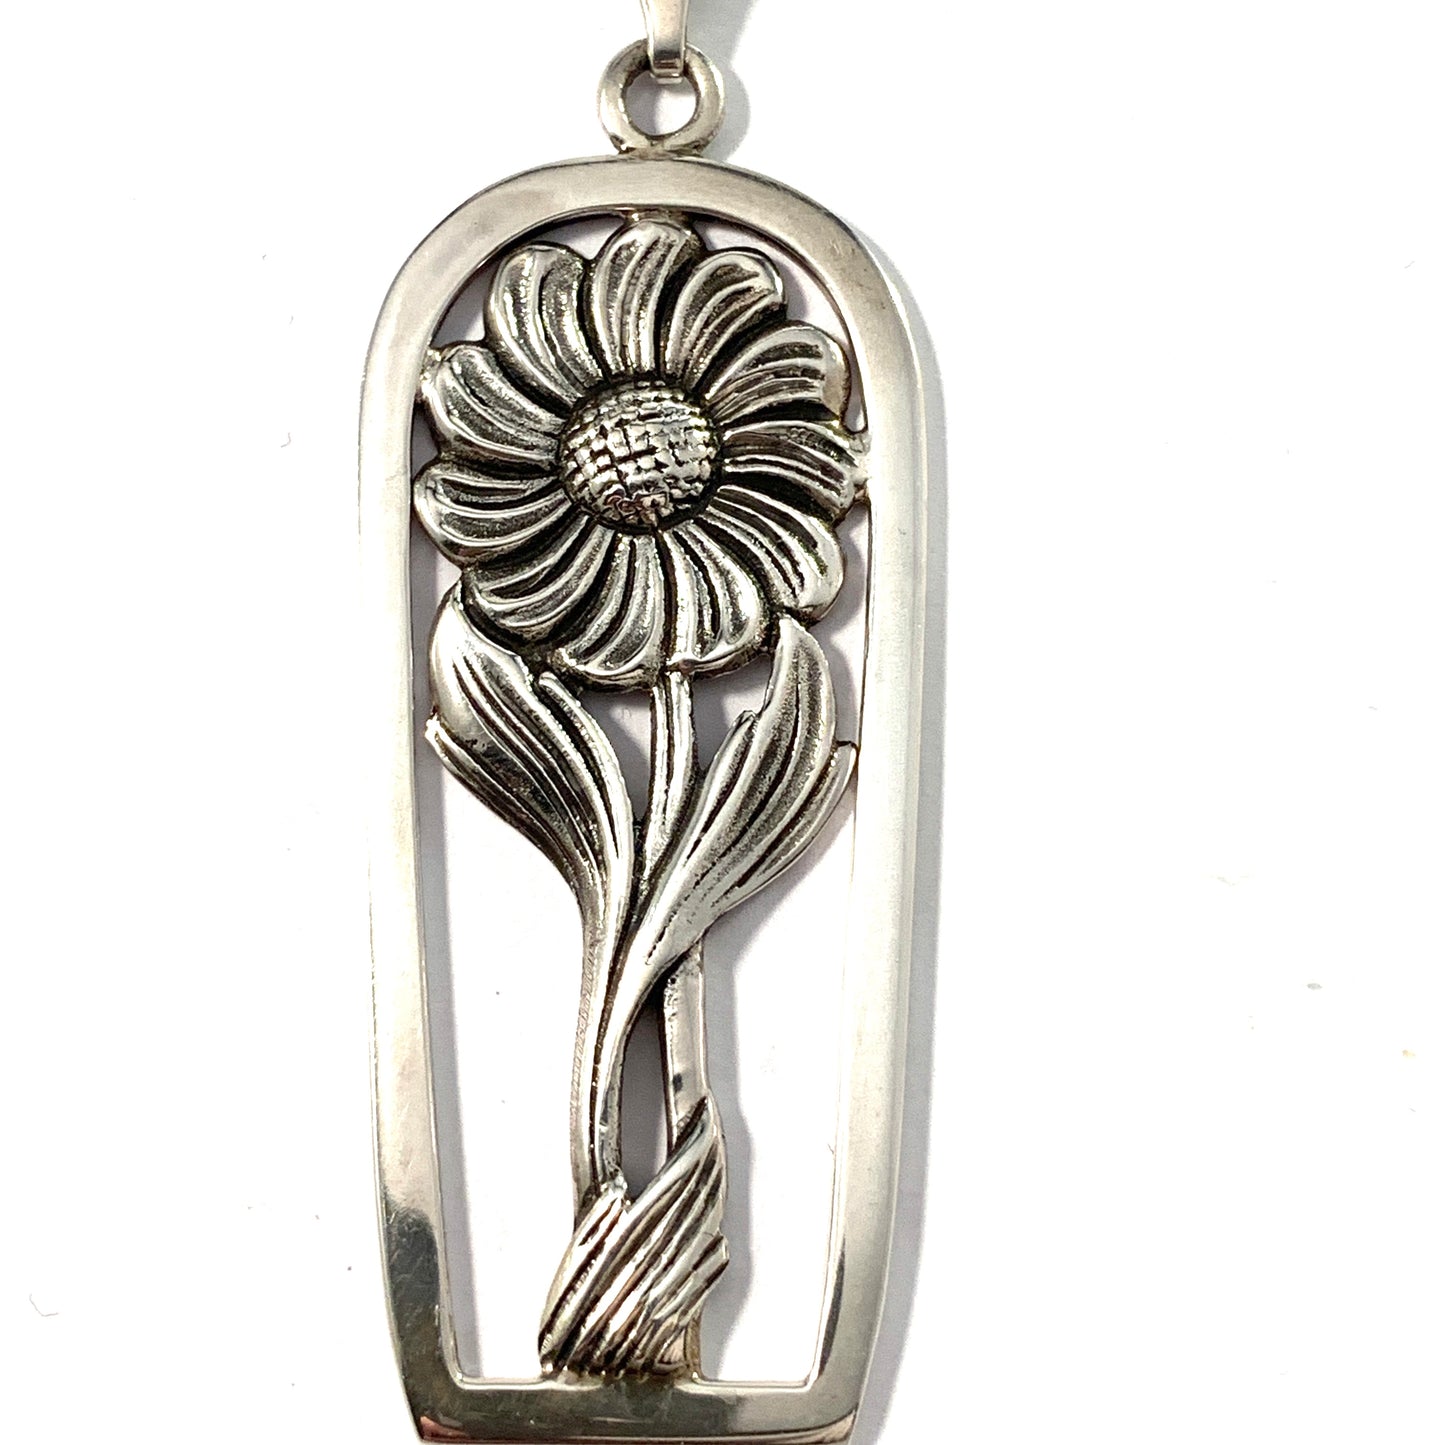 Swedish Import 1970s. Sterling Silver Large Flower Hippie Pendant Necklace.